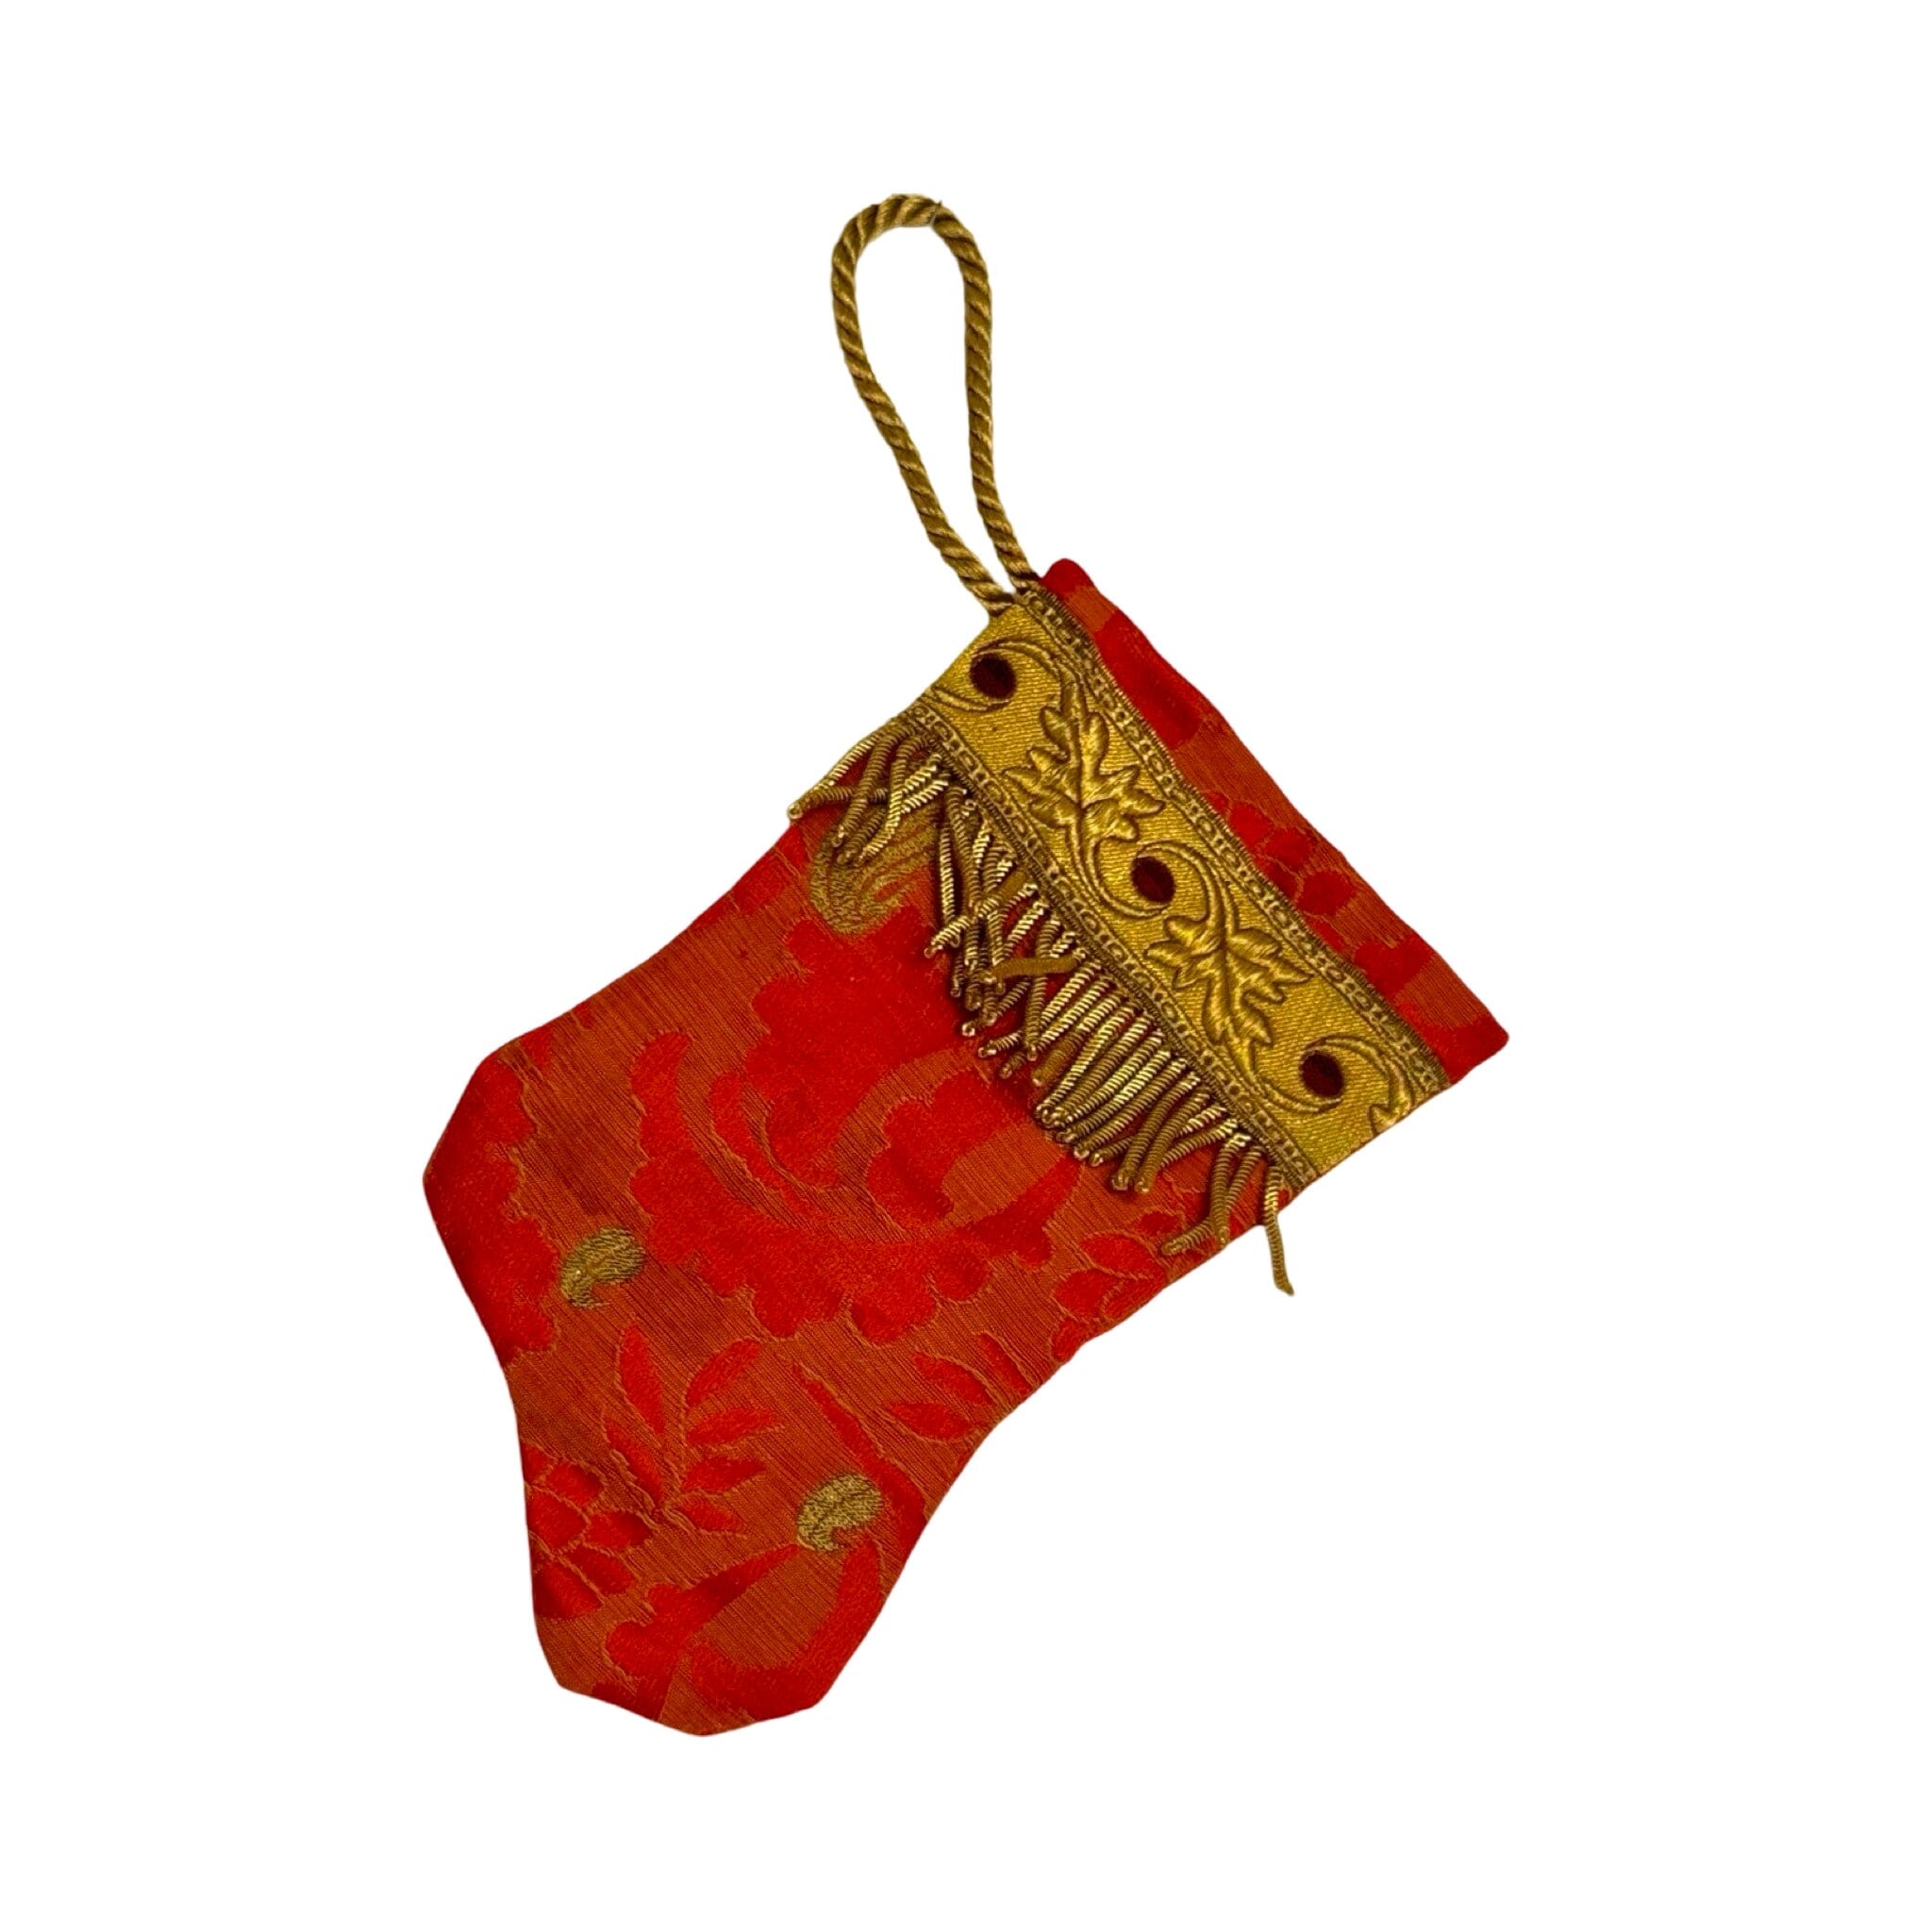 Handmade Mini Stocking Made From Vintage Fabric and Trims- Red and Gold Ornament B. Viz Design H 